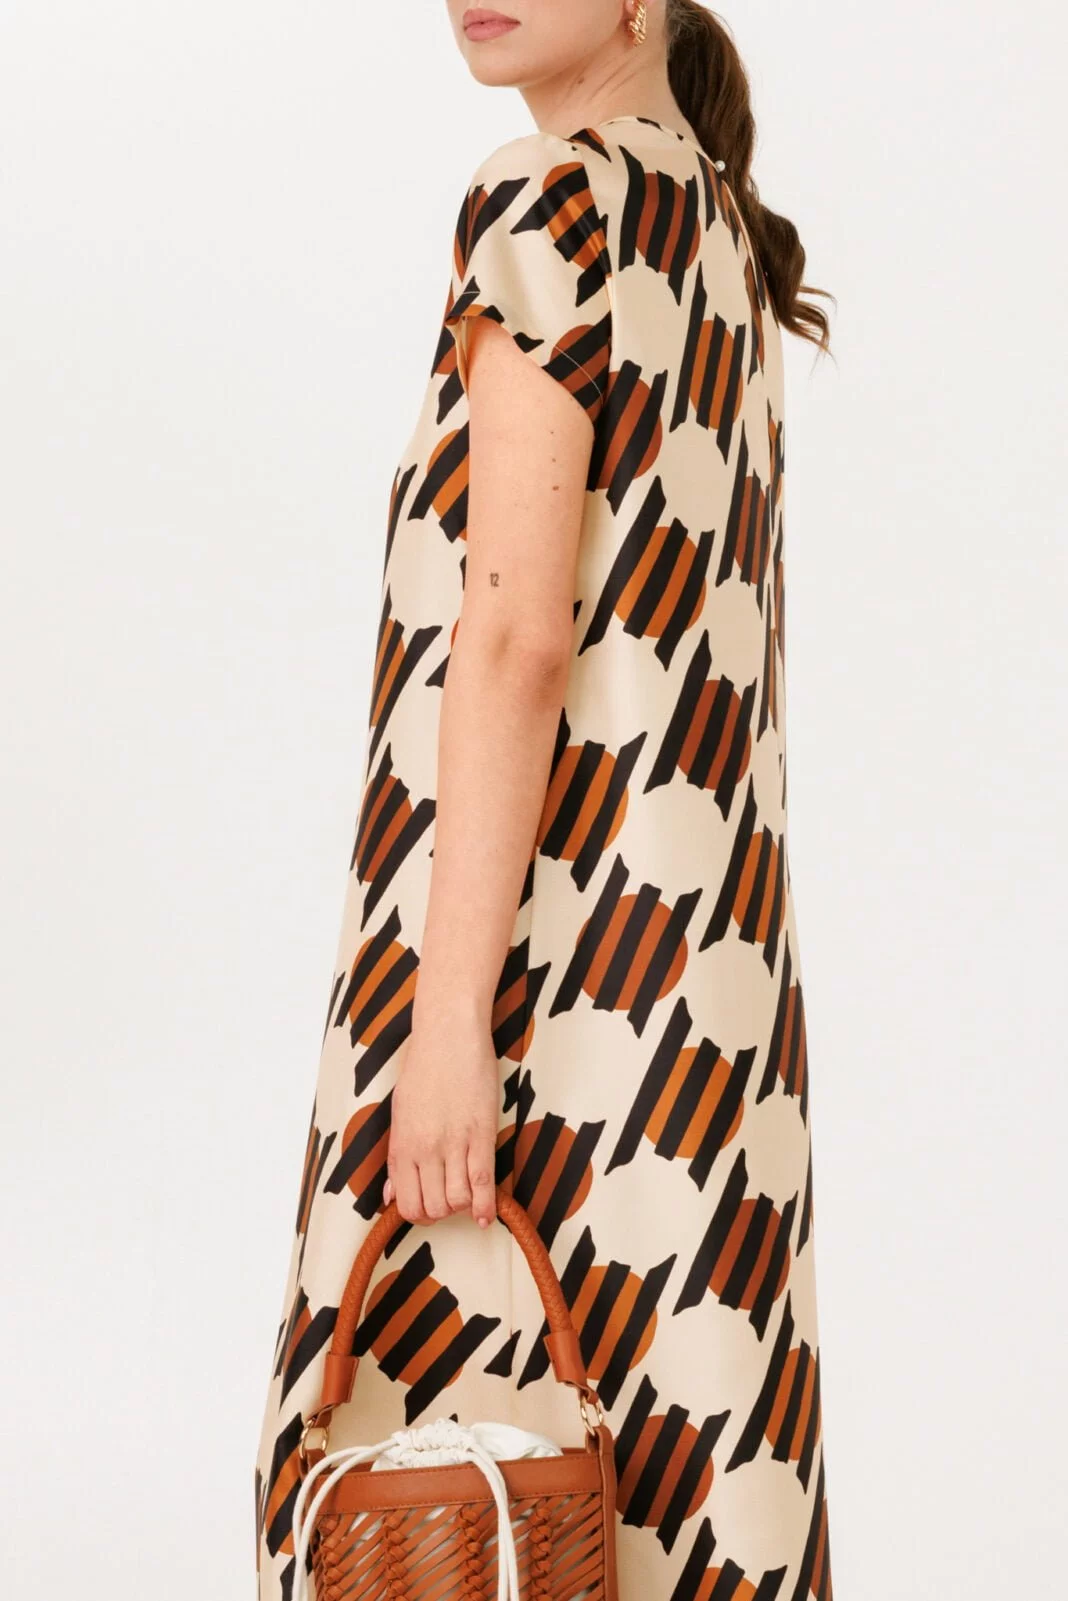 Summery Silk Twill Kaftan Dress - Beige and Brown Geometric Print for Vacation and Summer Vibes